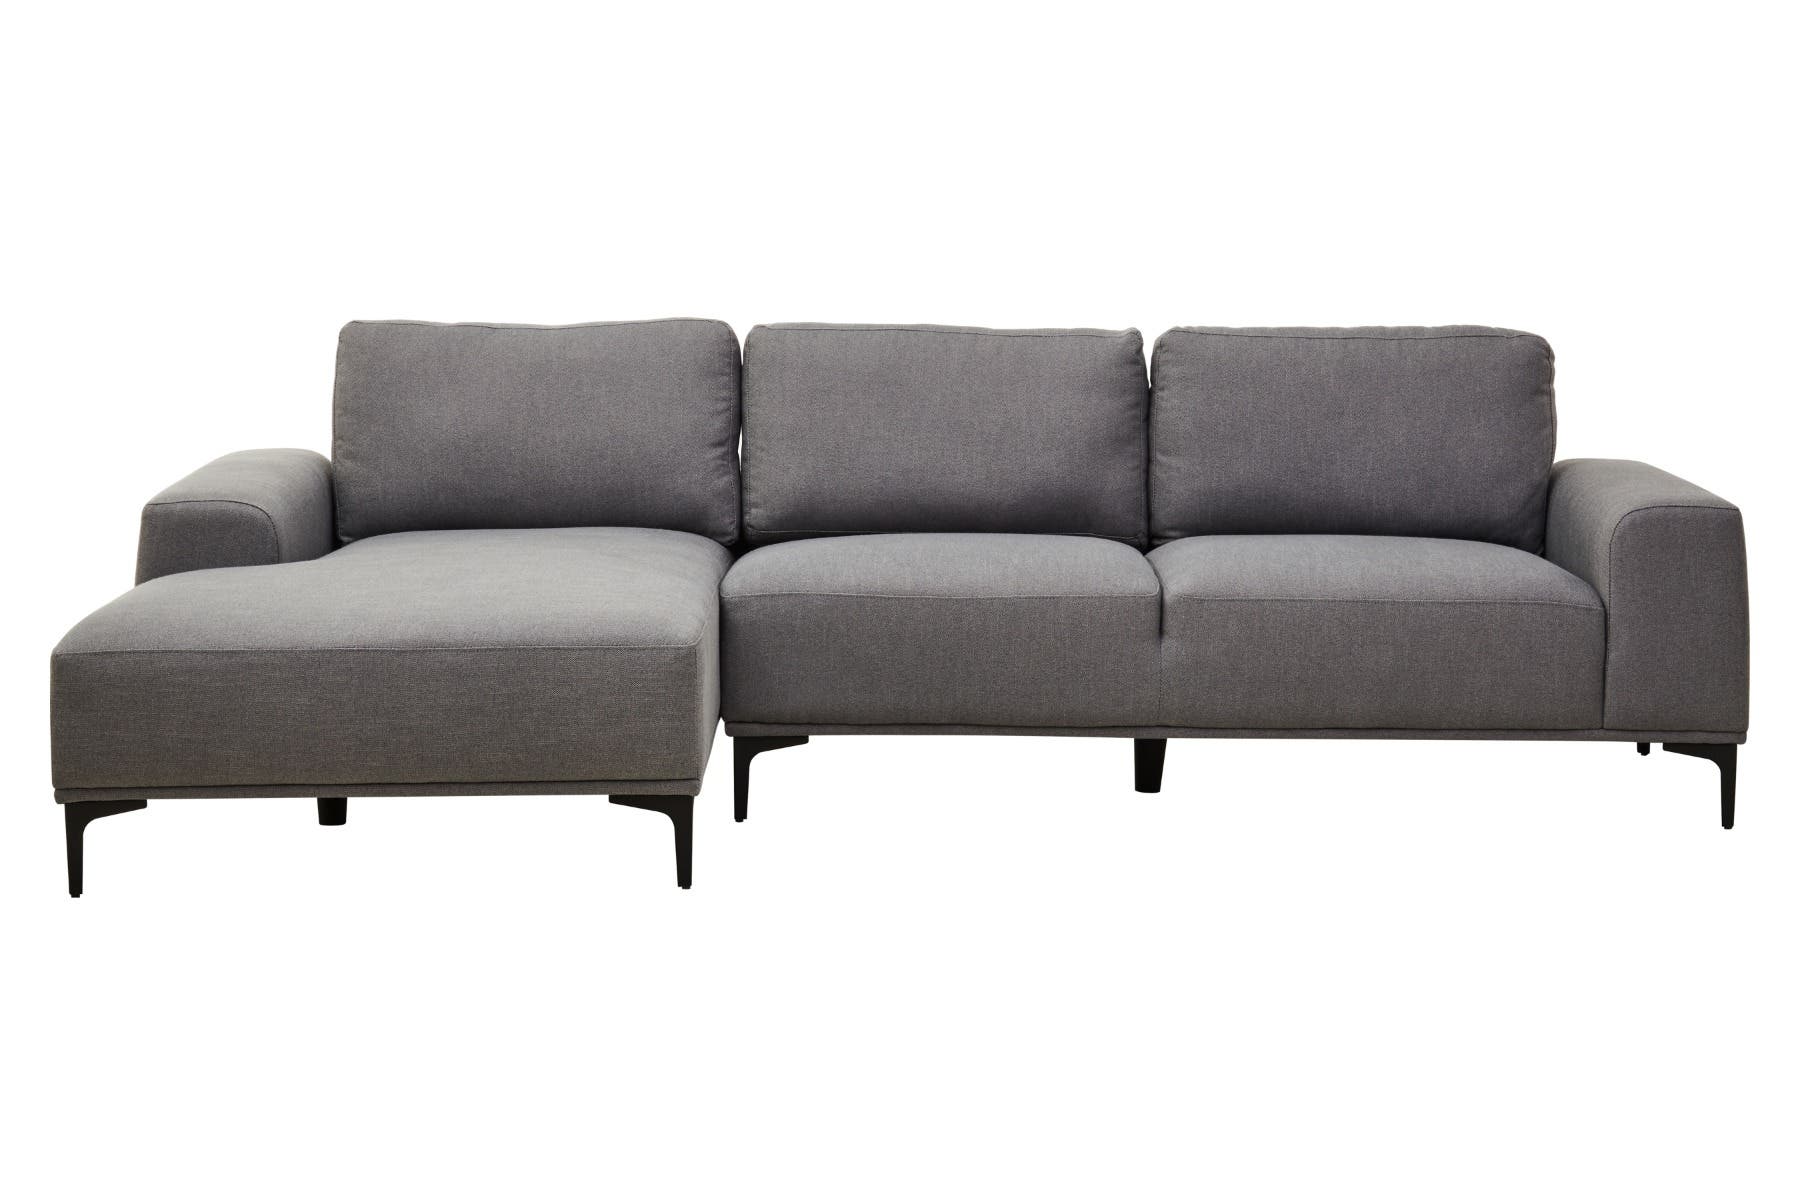 Toulon 3 Seat Grey Fabric Right Chaise Sofa